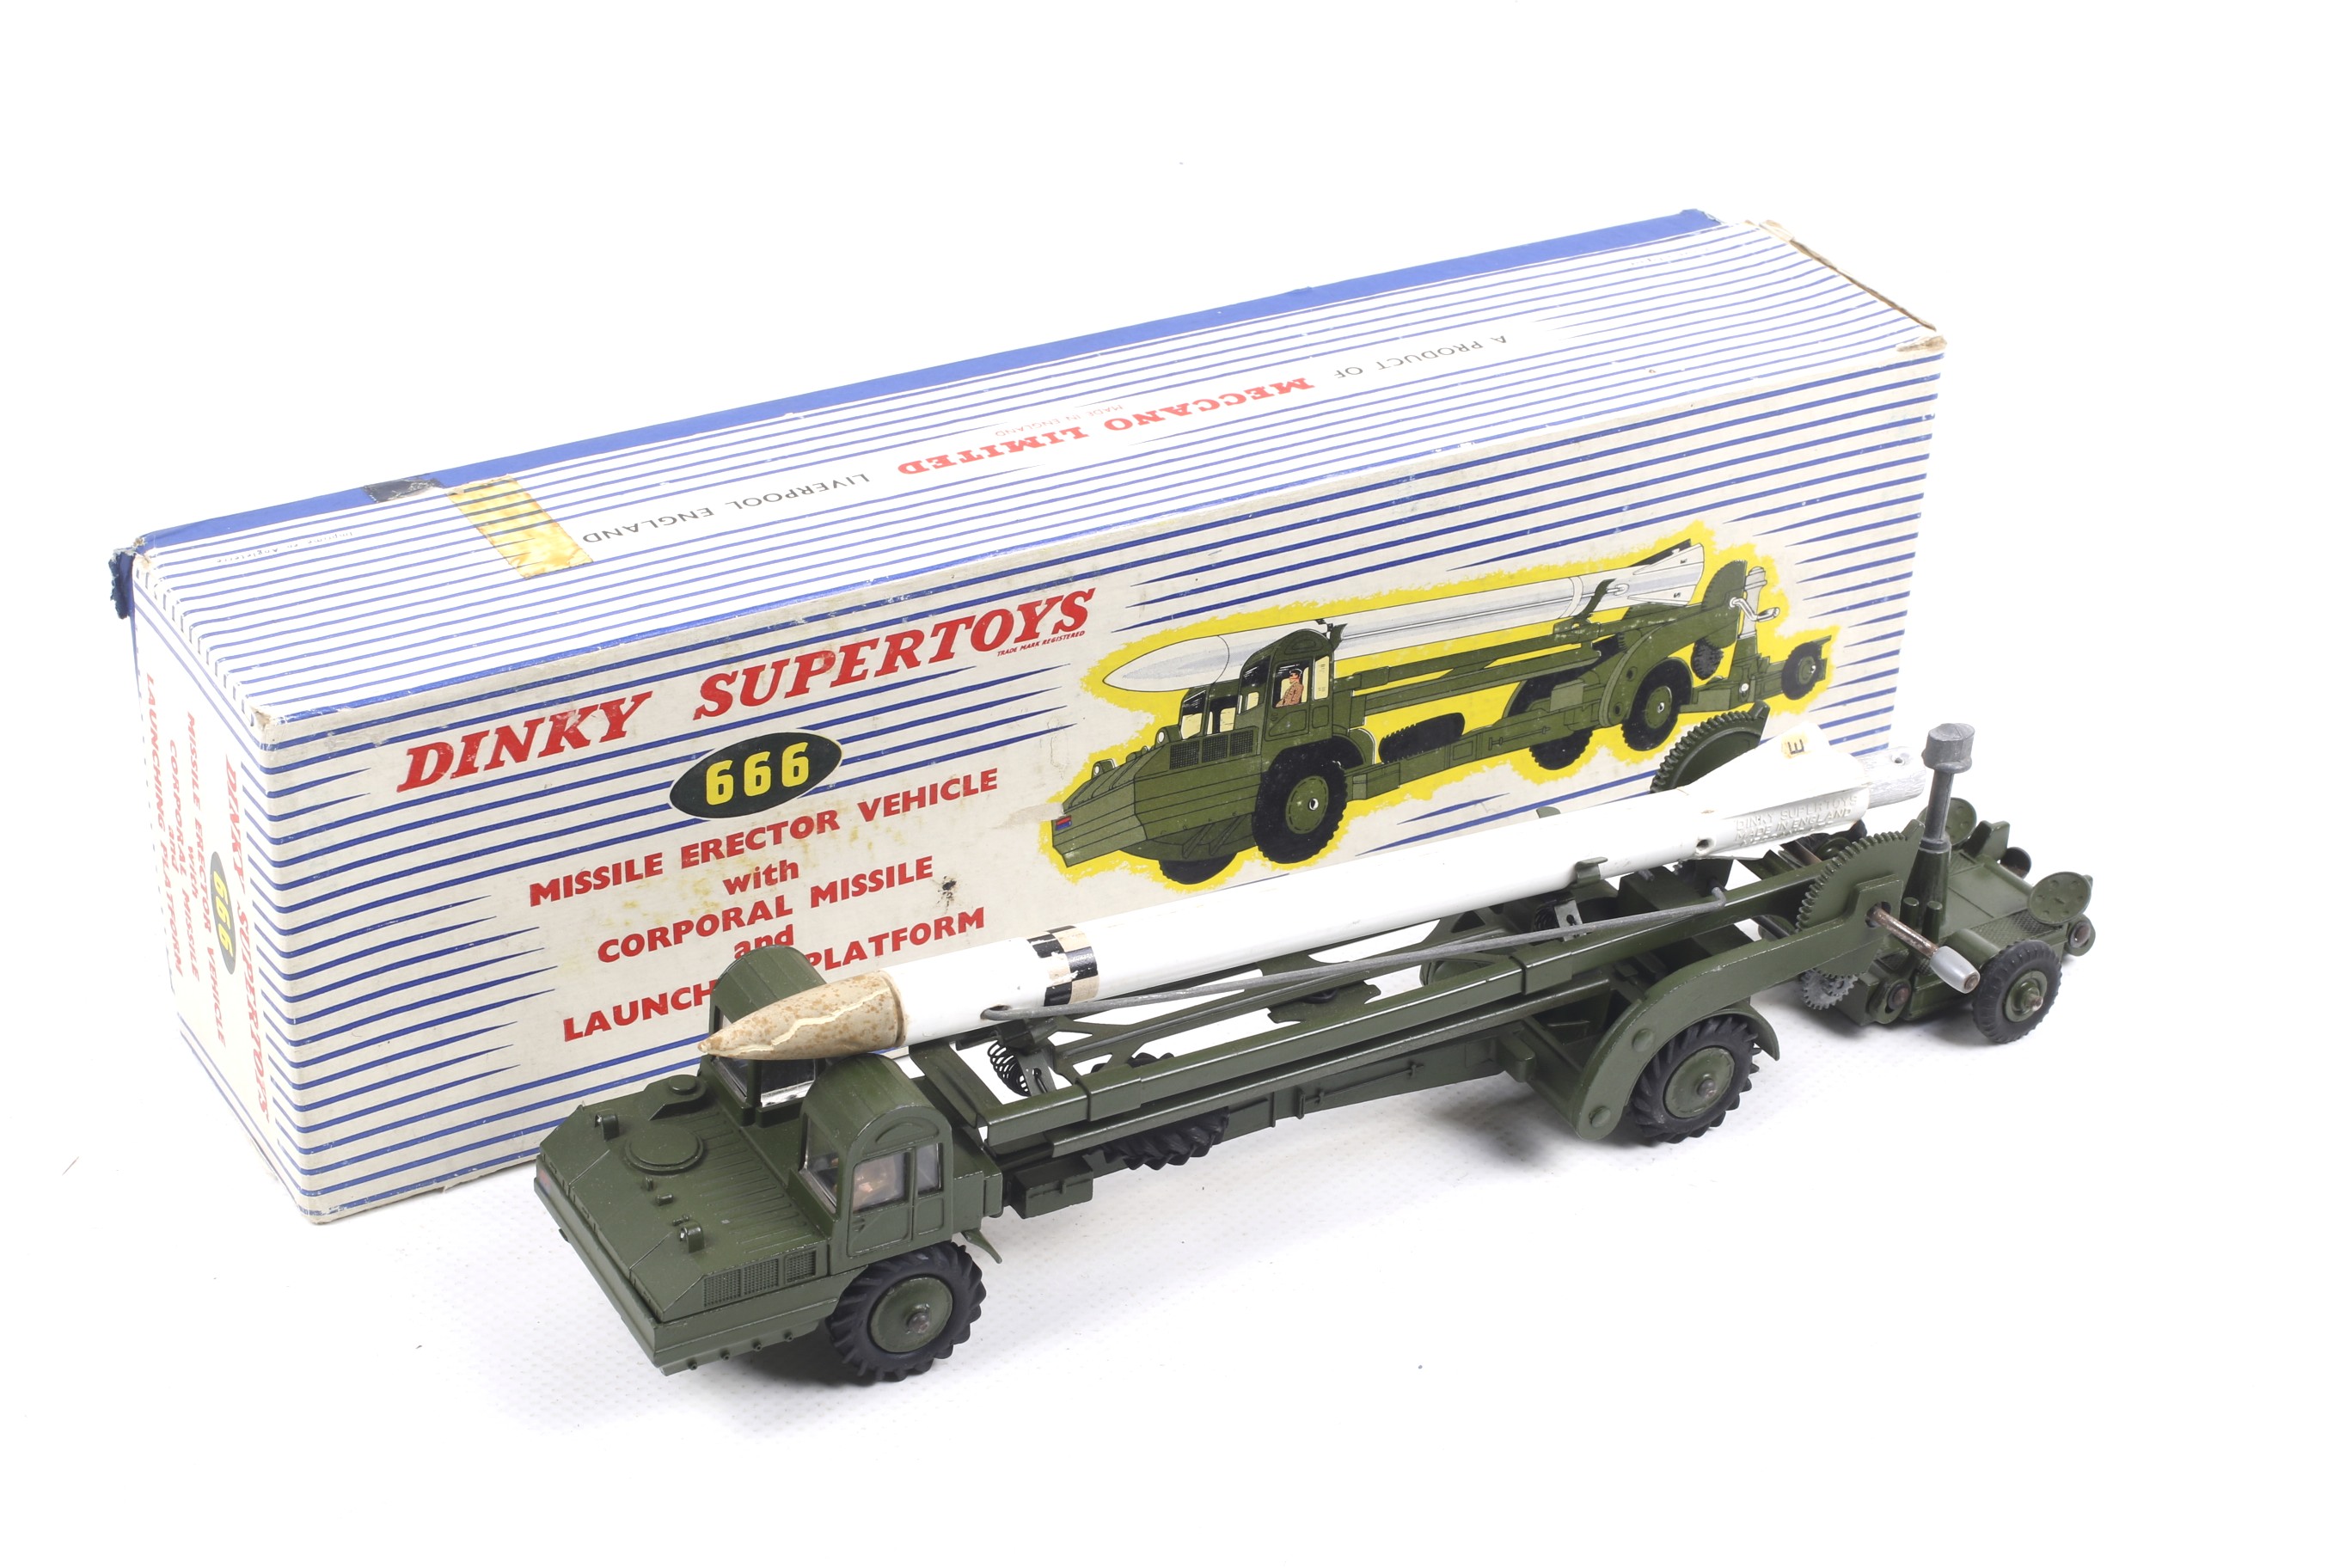 A Dinky diecast missile erector vehicle with missile and platform. No.